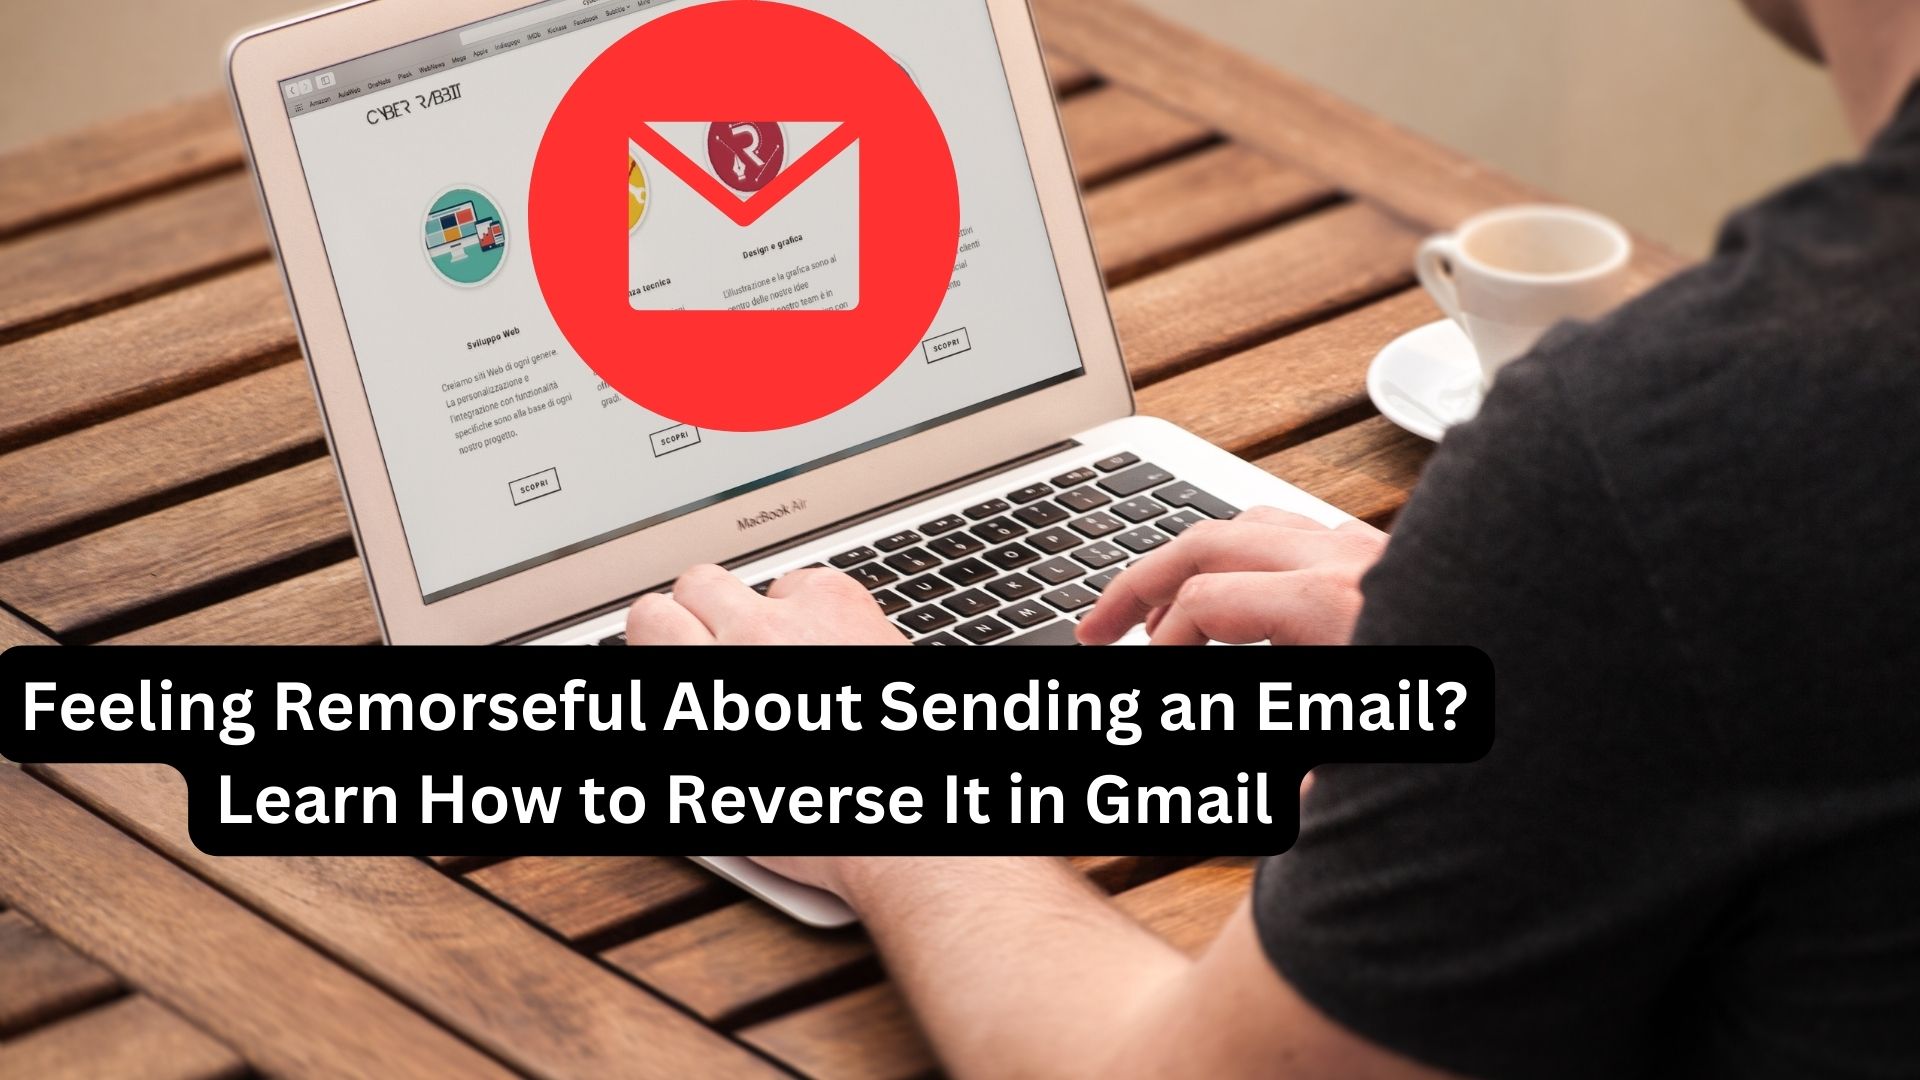 Feeling Remorseful About Sending an Email? Learn How to Reverse It in Gmail